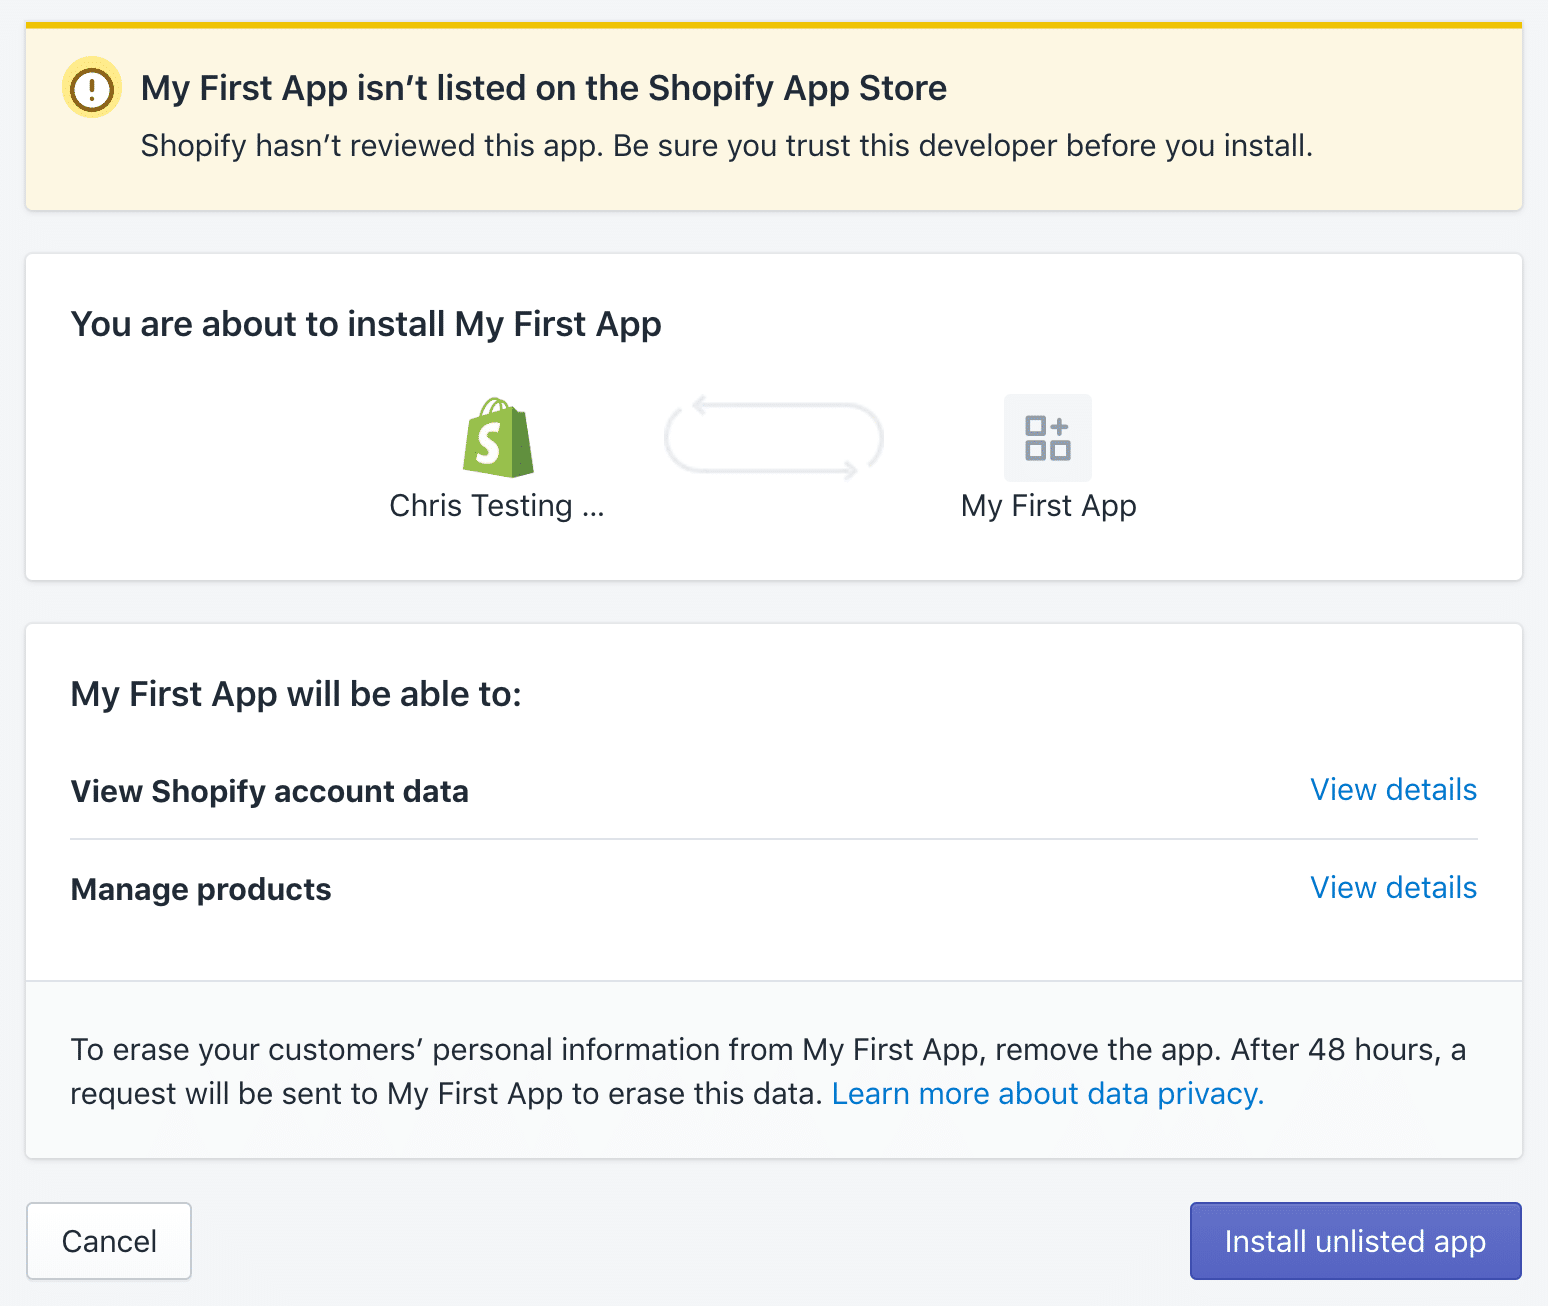 Install an unlisted app